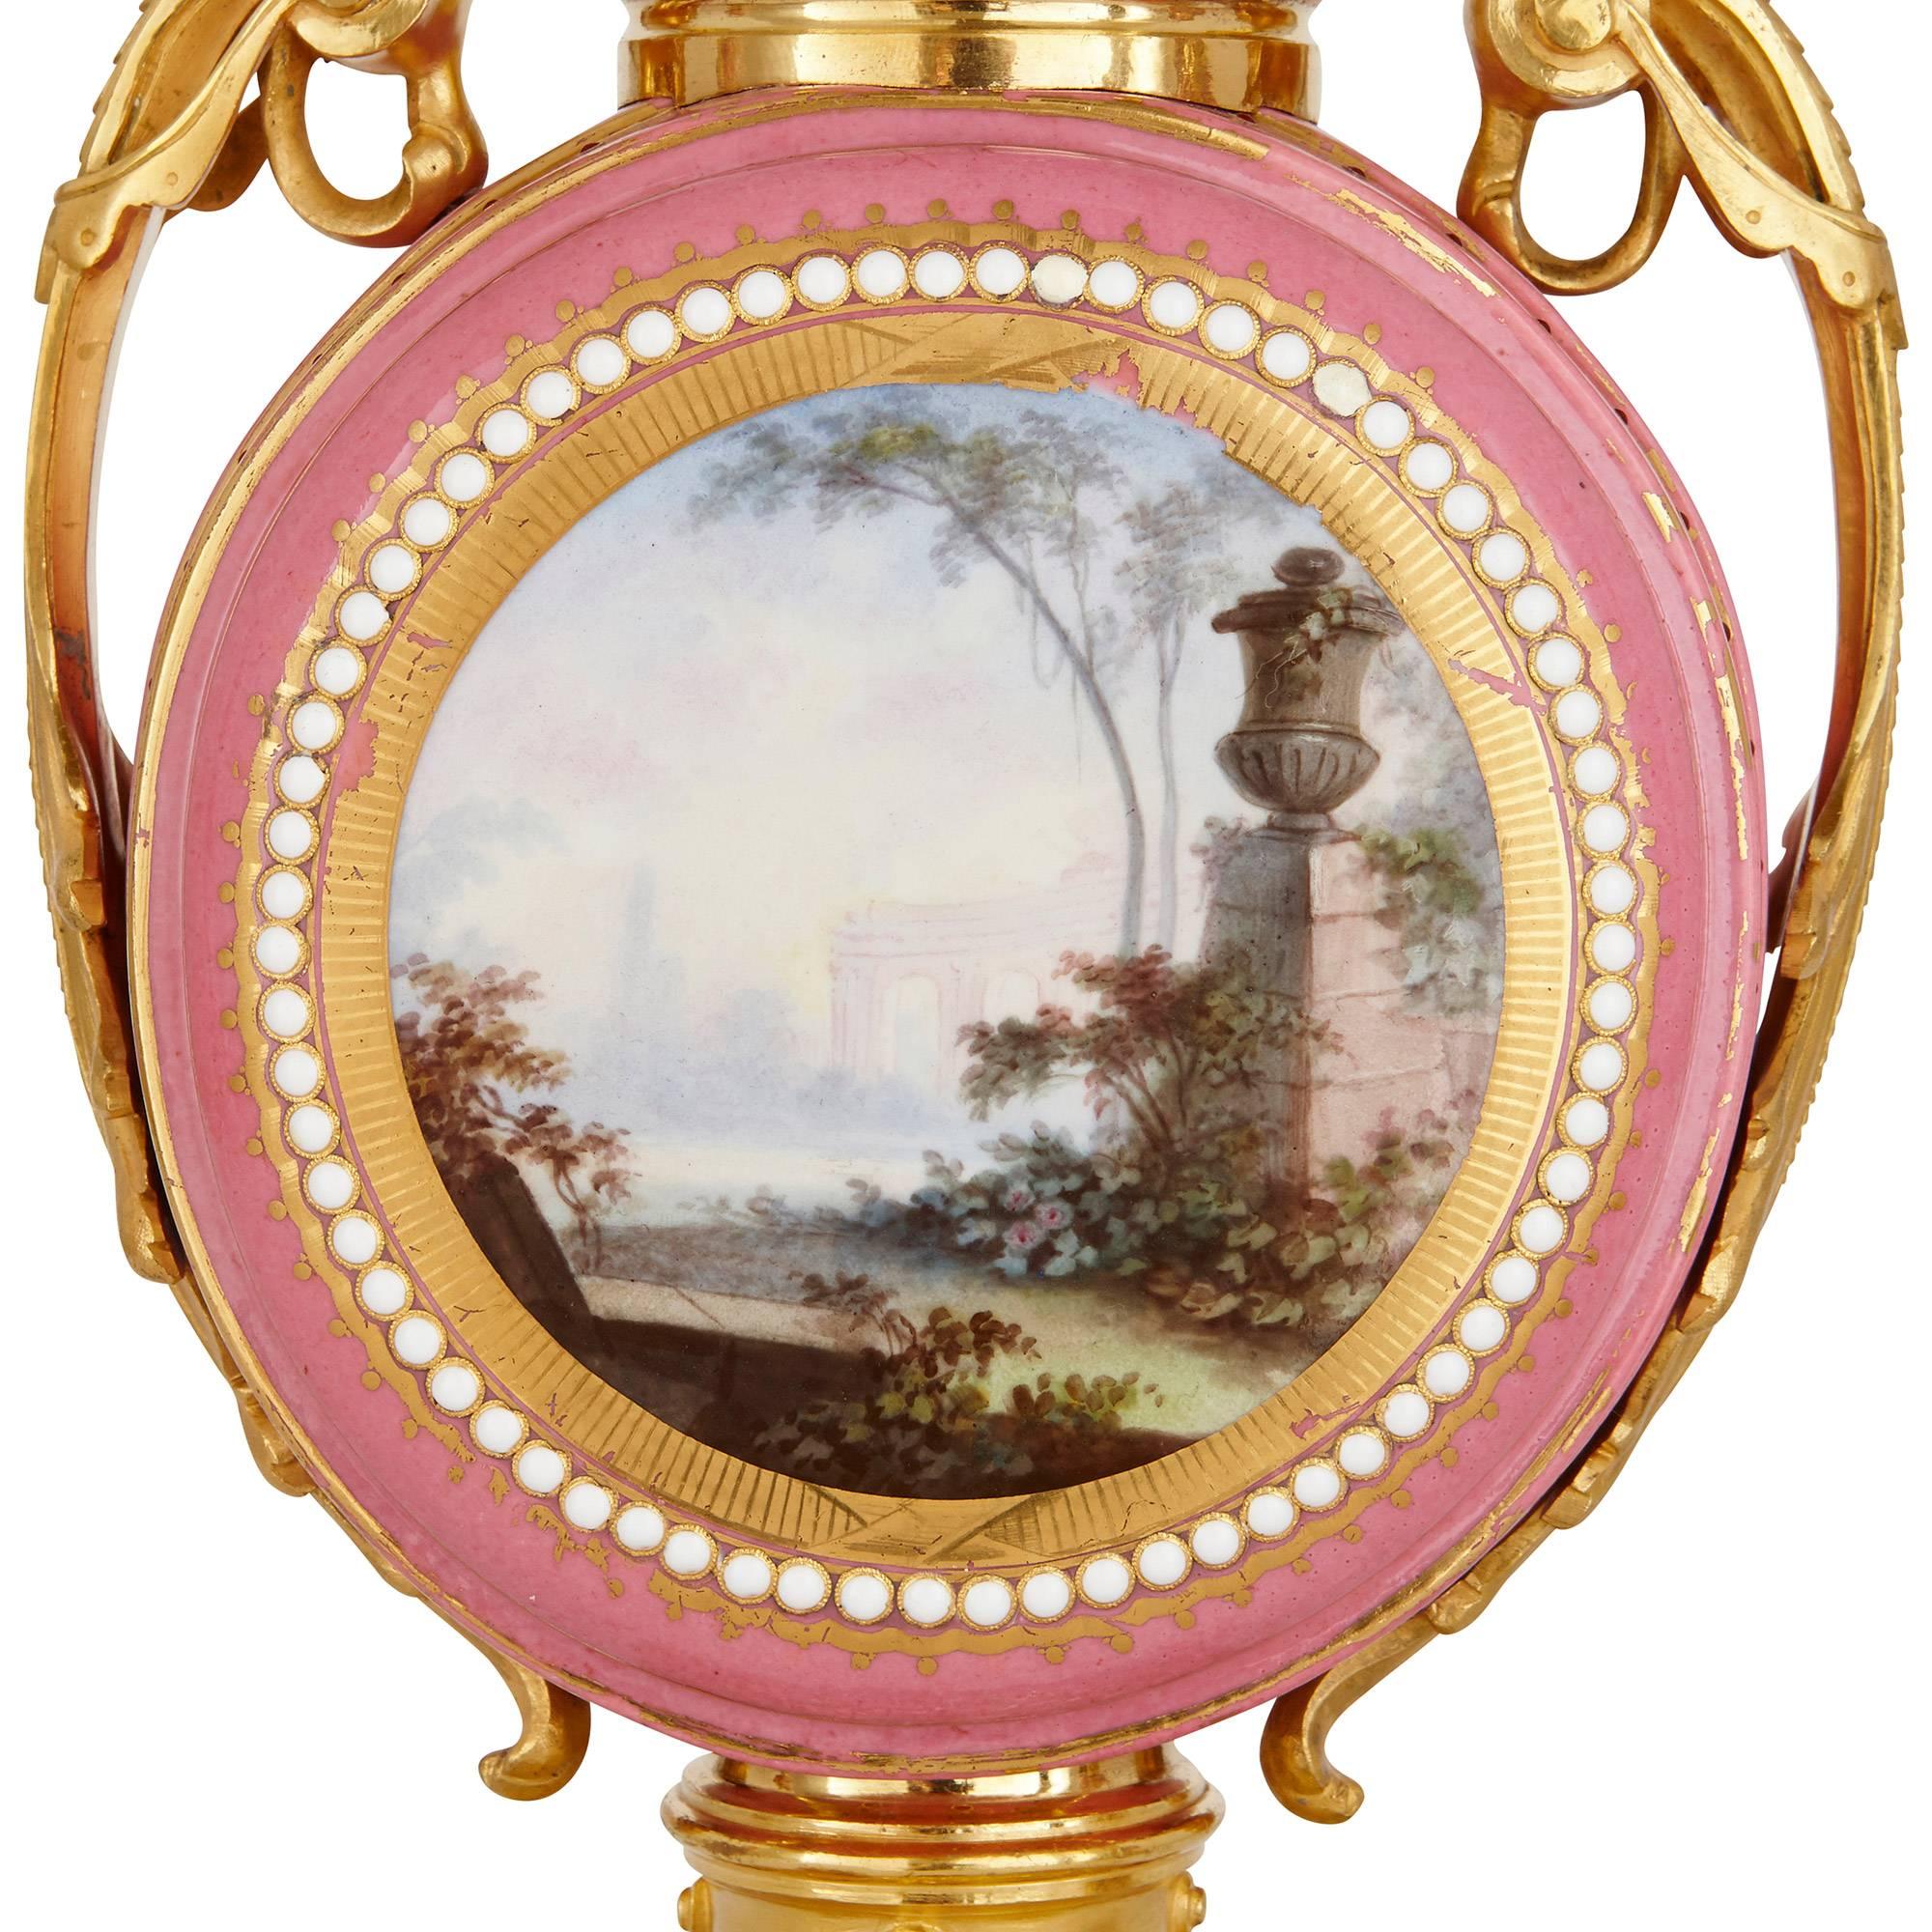 Sèvres Style Gold Ormolu and Pink Porcelain Antique French Three-Piece Clock Set For Sale 1